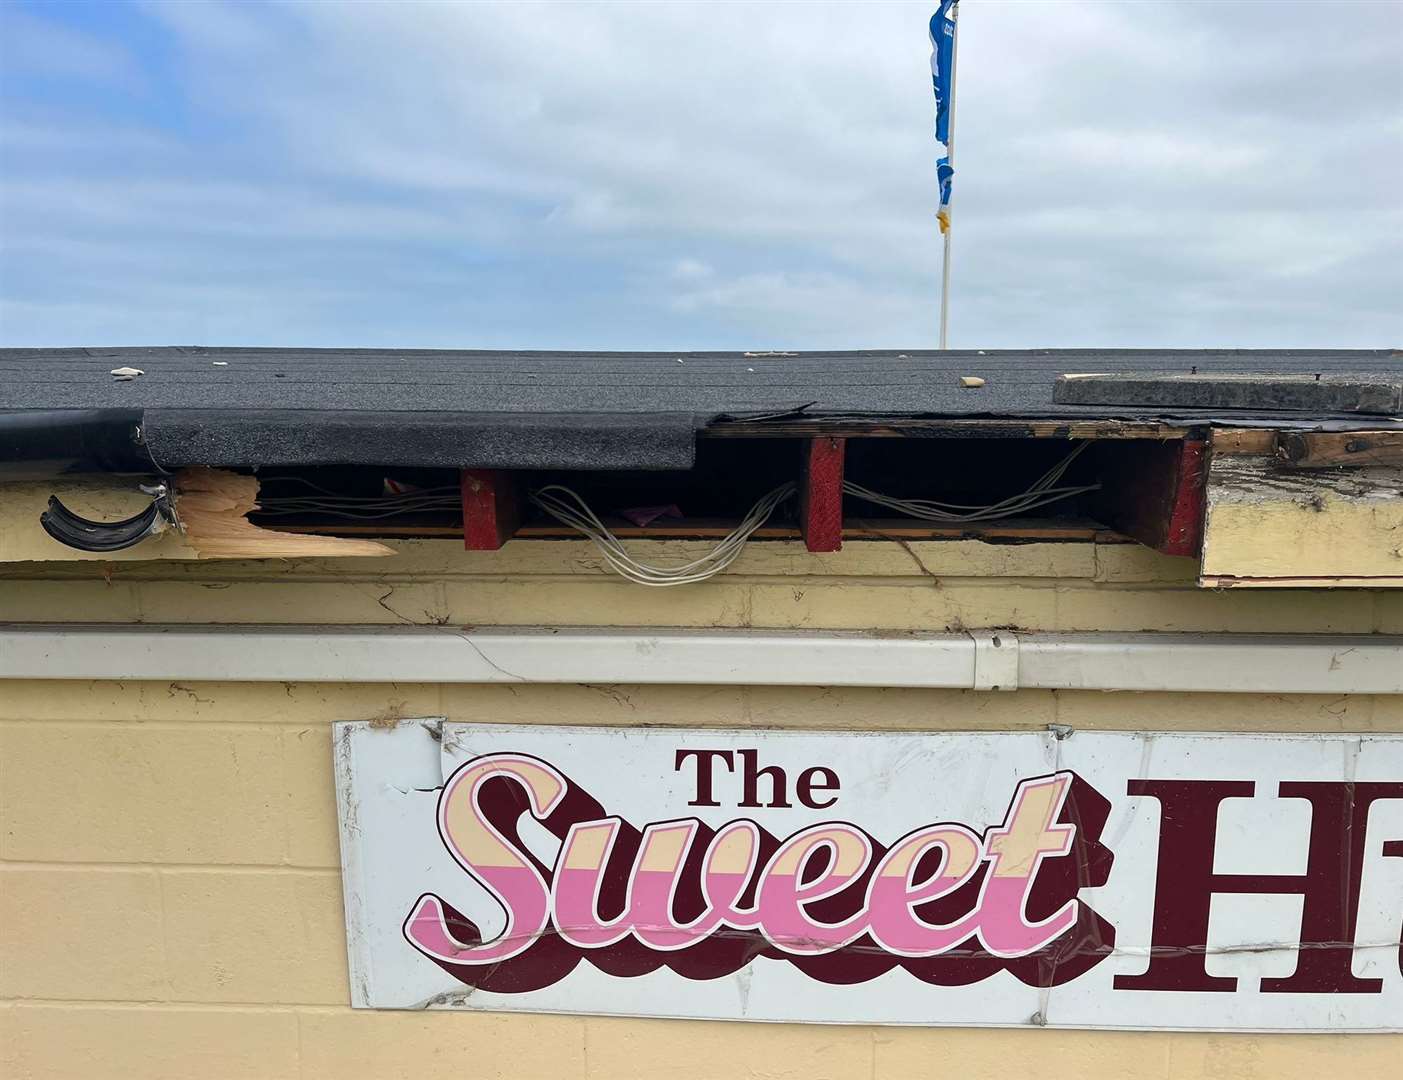 The shop's roof was damaged following the attack and will need to be repaired